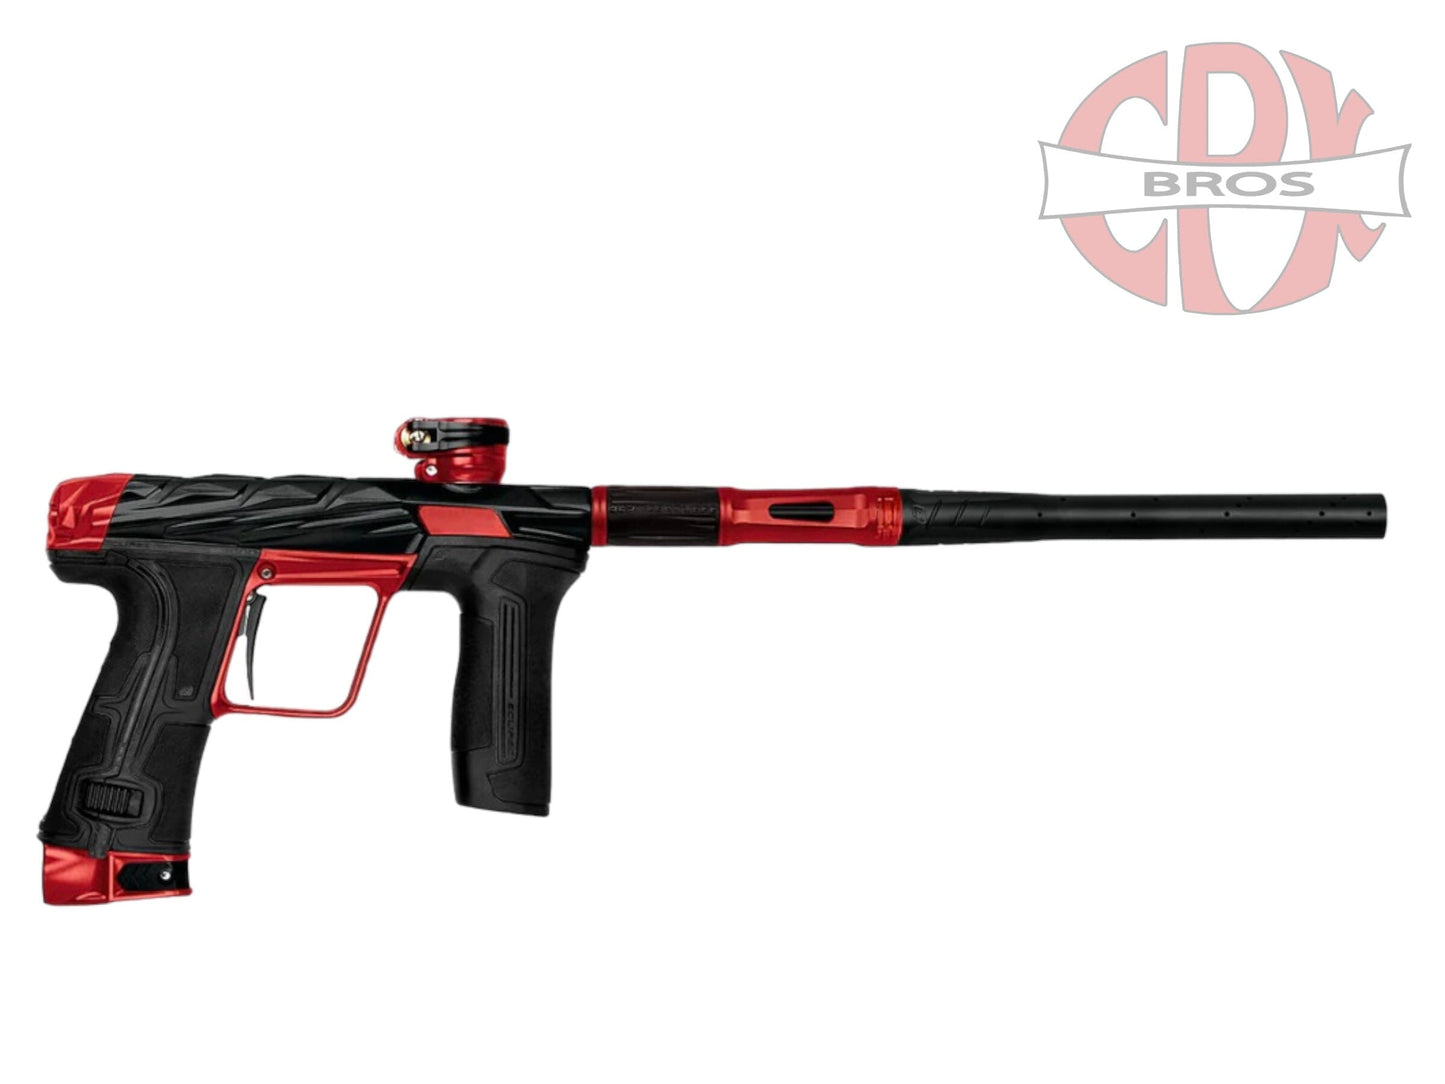 Used NEW PLANET ECLIPSE CS3 - INFAMOUS EDITION BLACK/RED Paintball Gun from CPXBrosPaintball Buy/Sell/Trade Paintball Markers, New Paintball Guns, Paintball Hoppers, Paintball Masks, and Hormesis Headbands